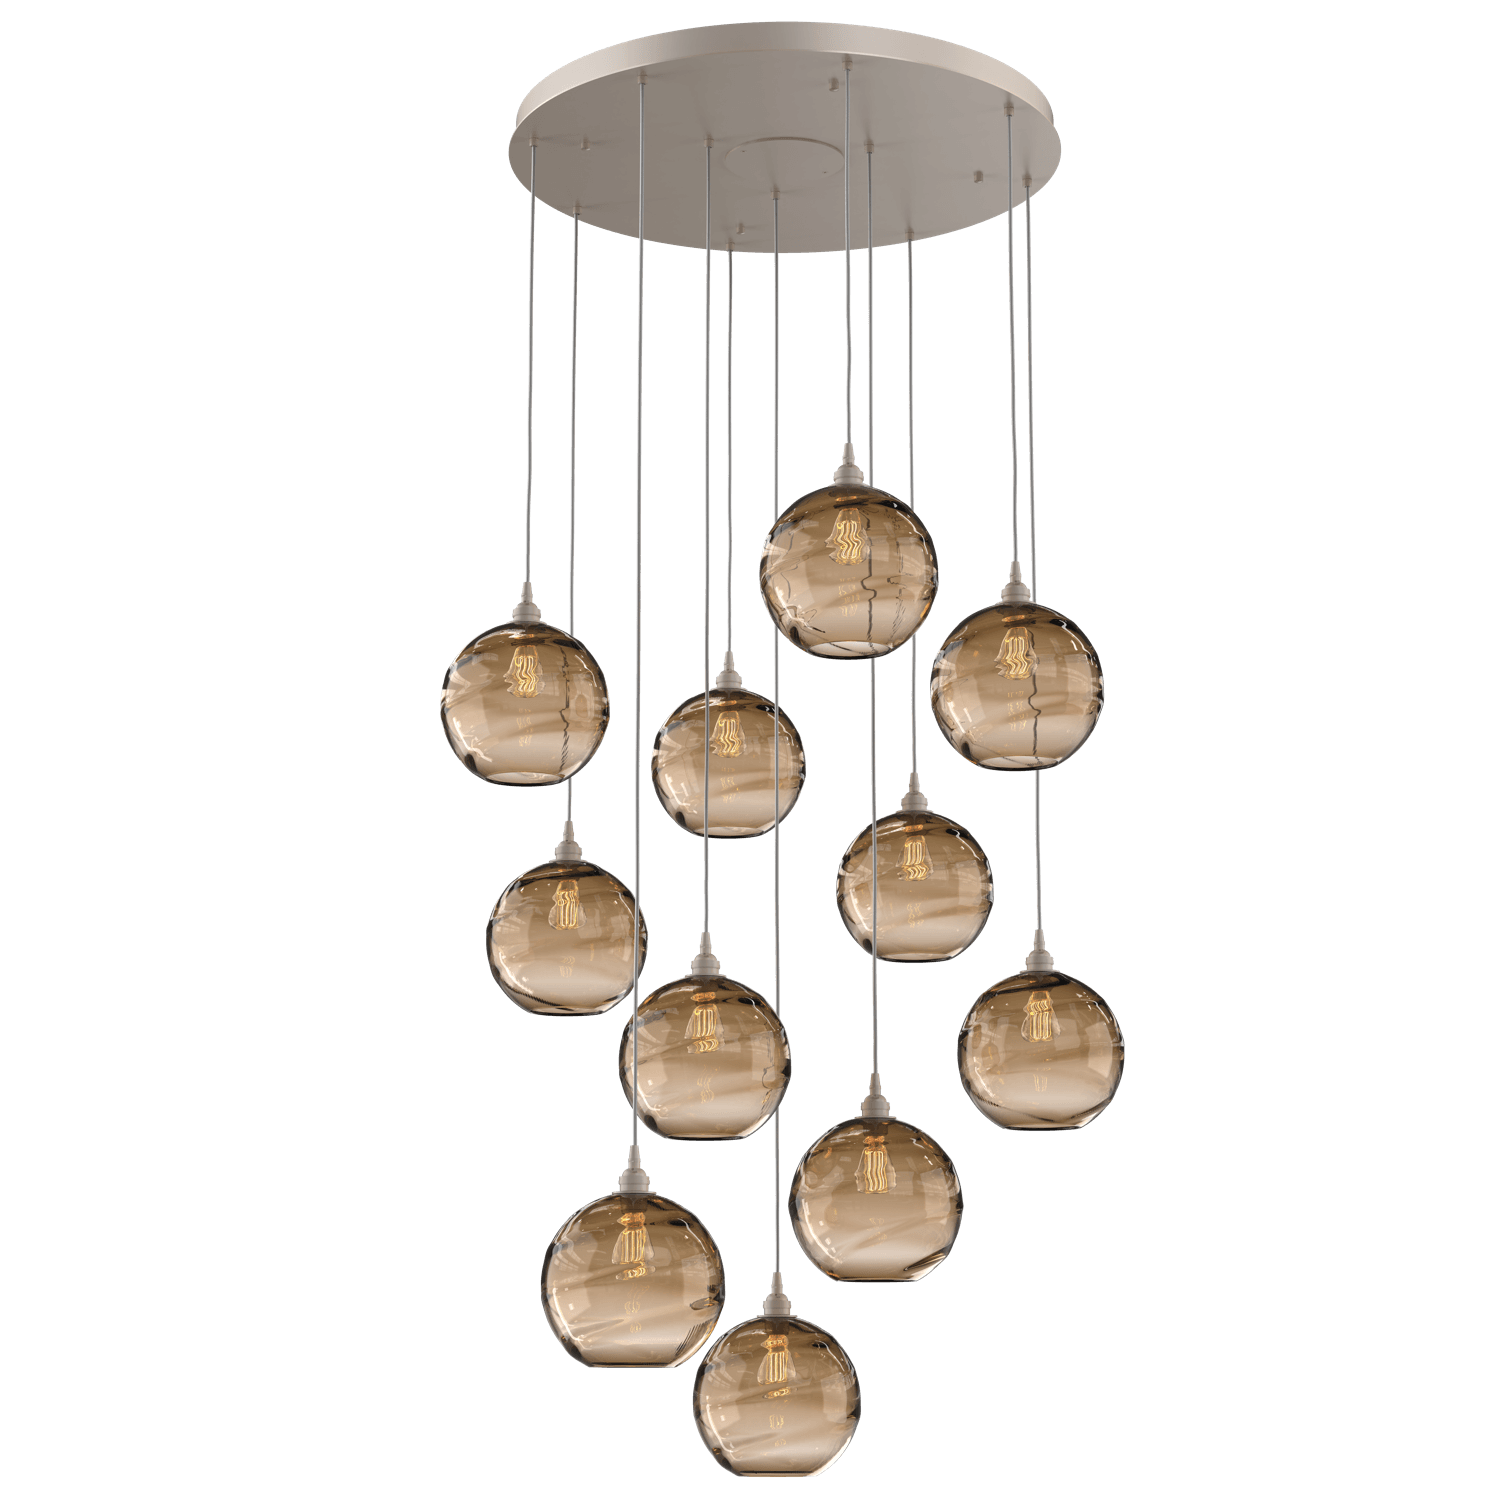 CHB0047-11-BS-OB-Hammerton-Studio-Optic-Blown-Glass-Terra-11-light-round-pendant-chandelier-with-metallic-beige-silver-finish-and-optic-bronze-blown-glass-shades-and-incandescent-lamping